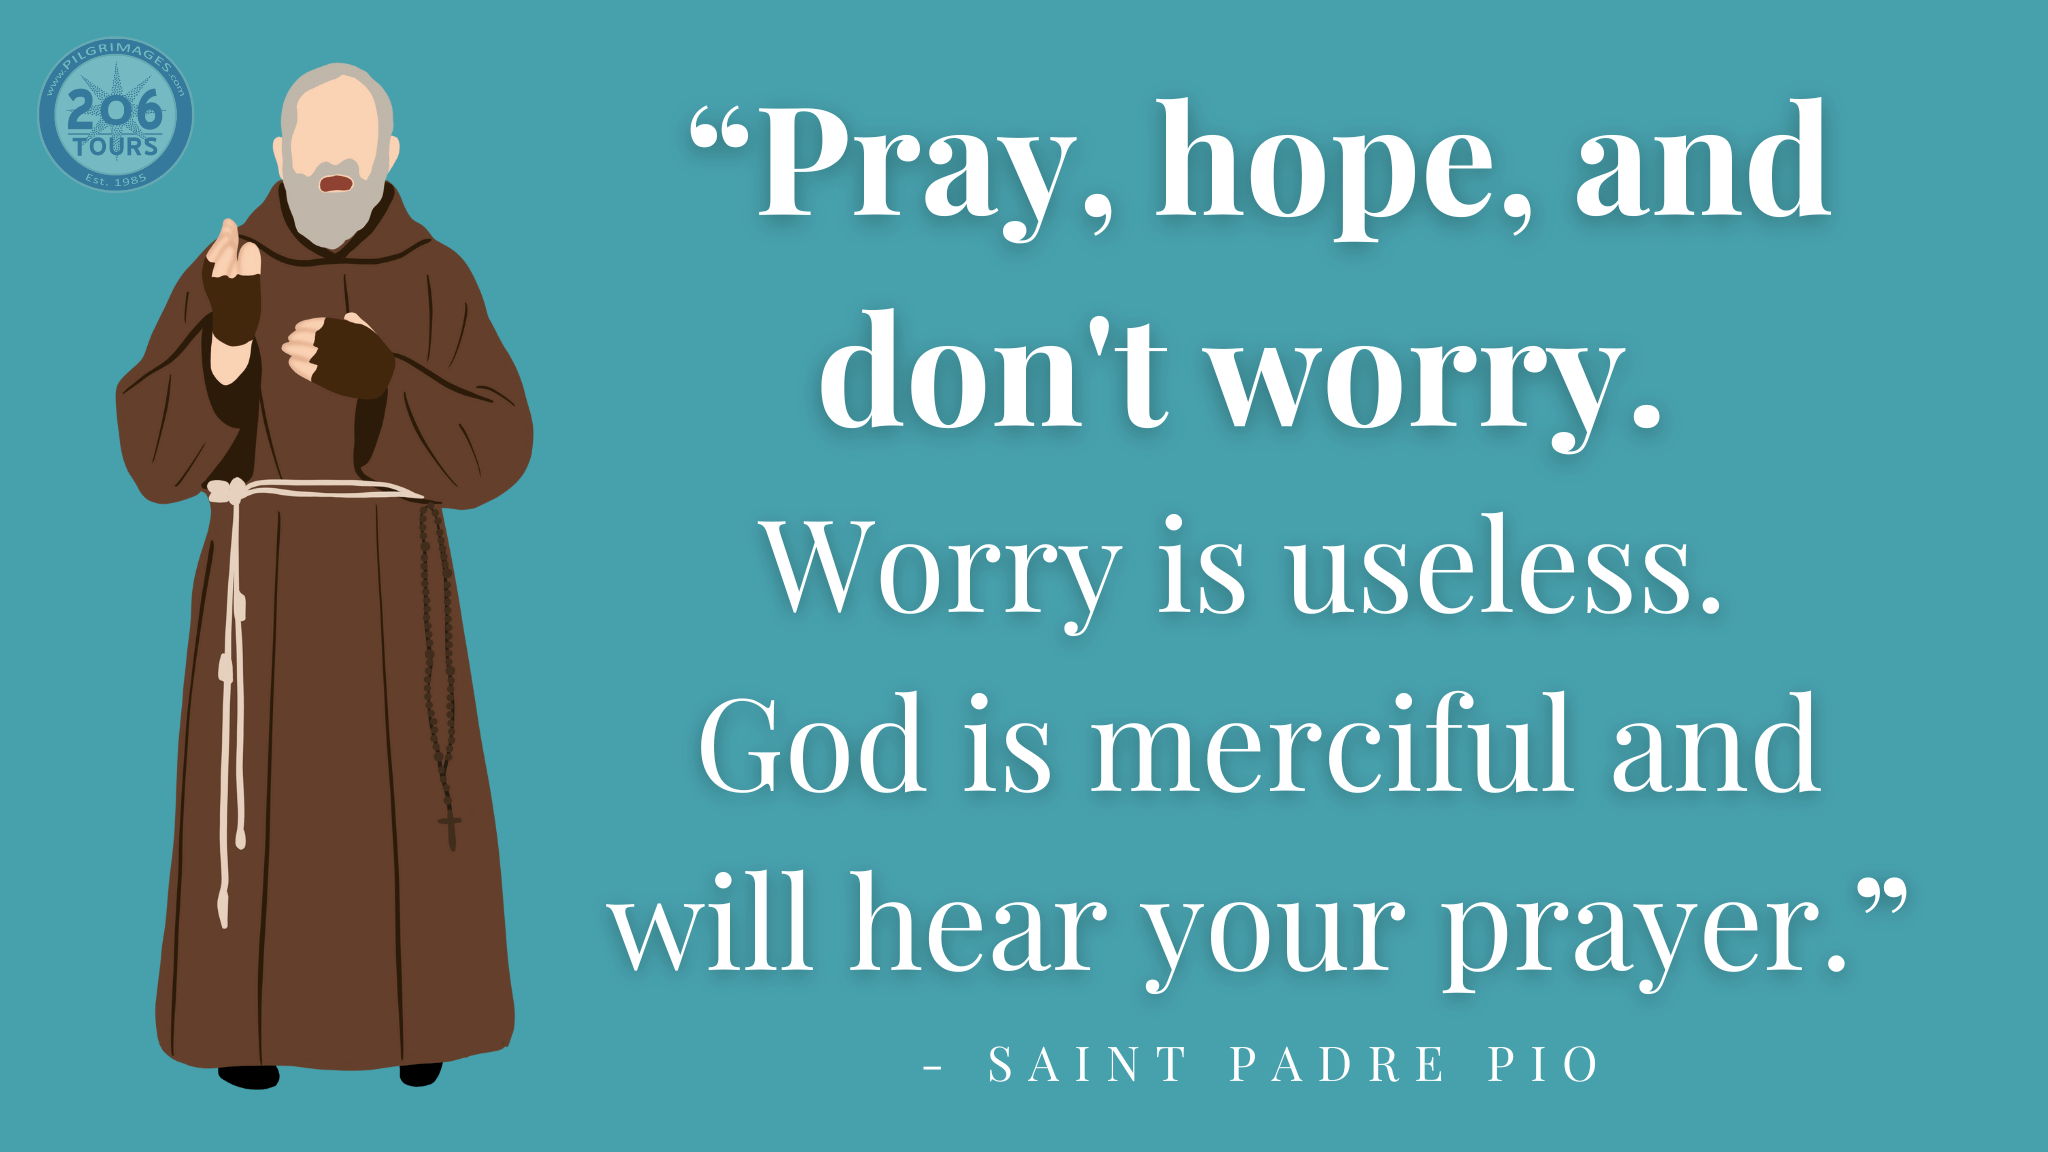 pray, hope, and don't worry - padre pio